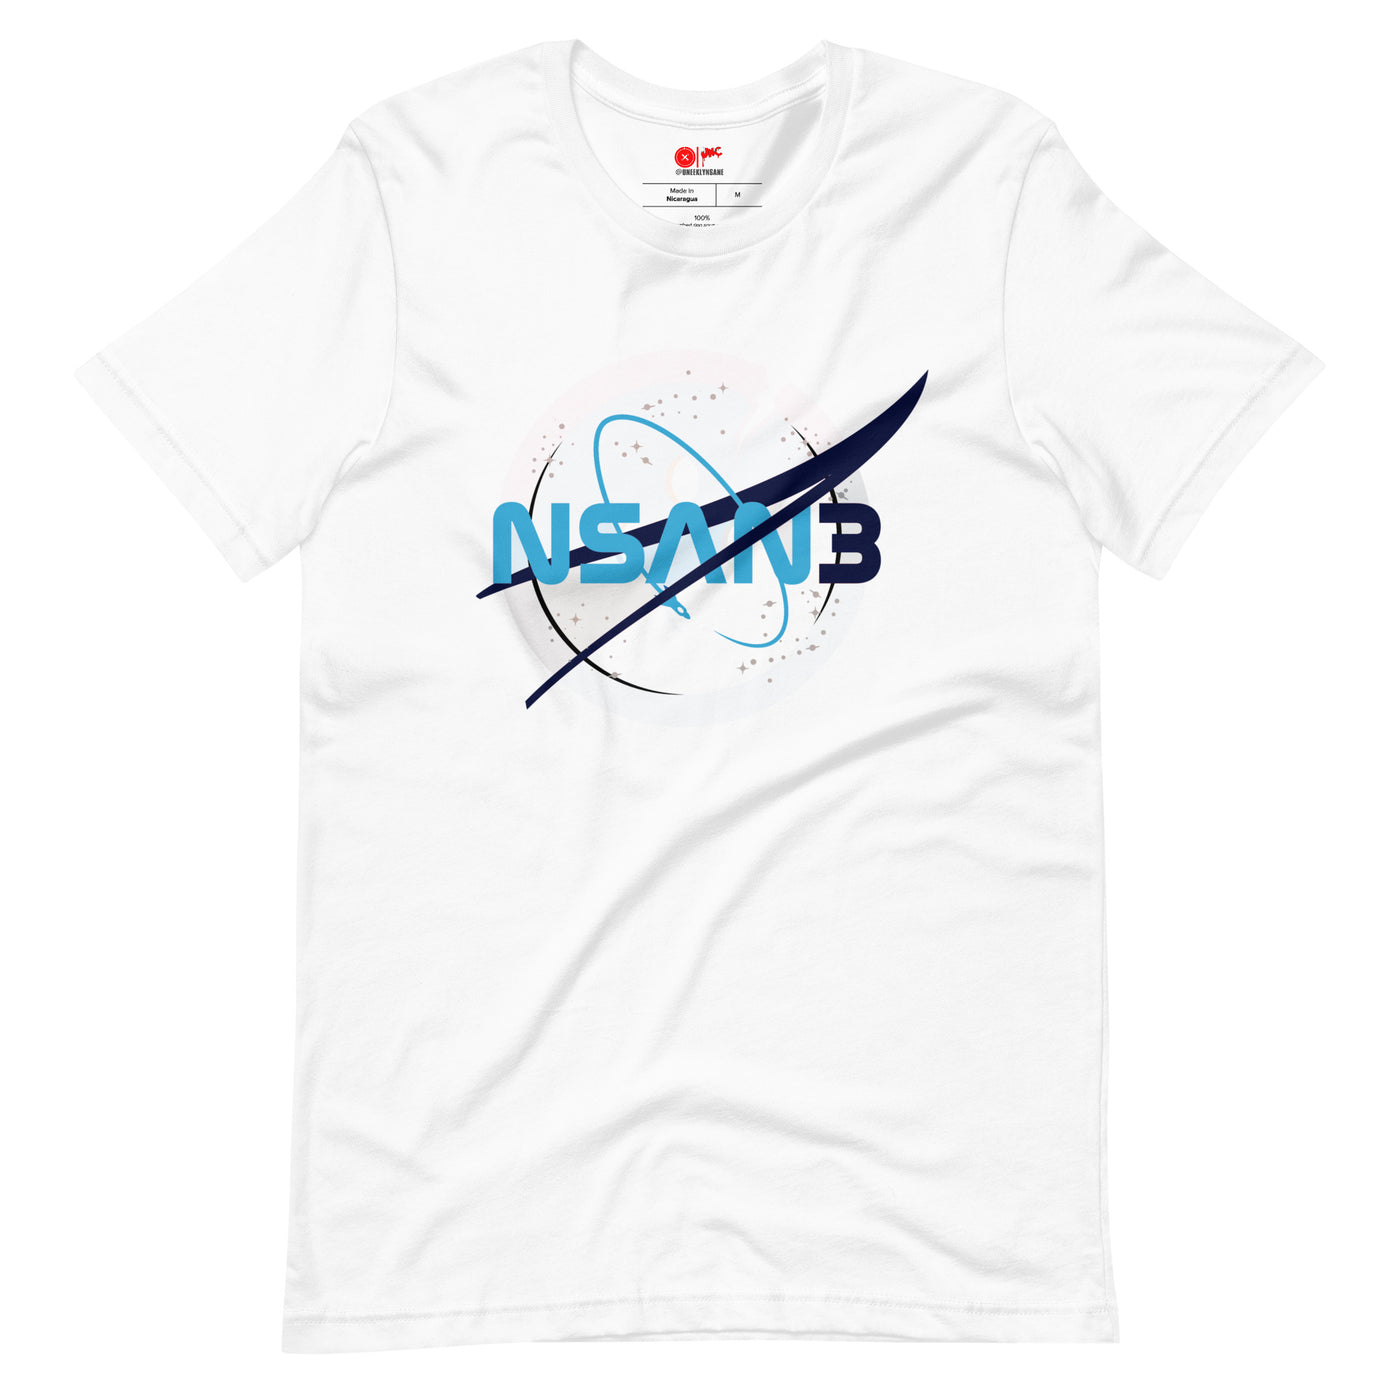 NSANE SPACE T-Shirt (University blue) - Unique Sweatsuits, hats, tees, shorts, hoodies, Outwear & accessories online | Uneekly Nsane